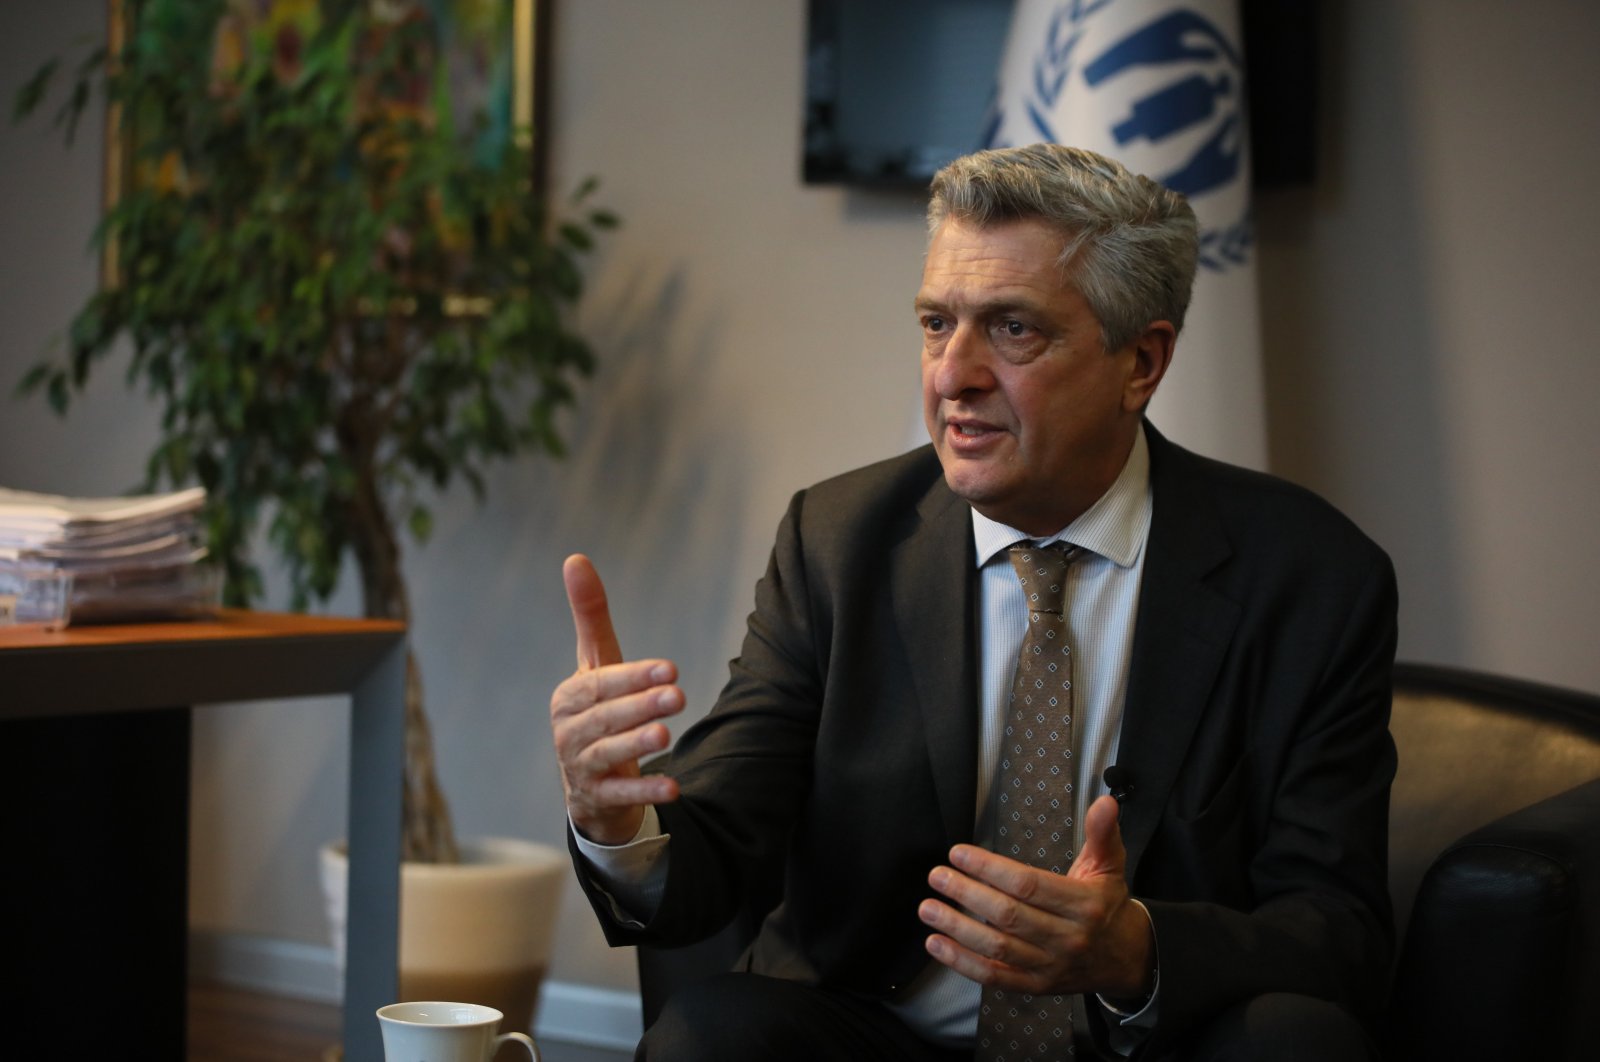 United Nations High Commissioner for Refugees Filippo Grandi comments on the migration situation in Turkey in this undated picture. (AA Photo)